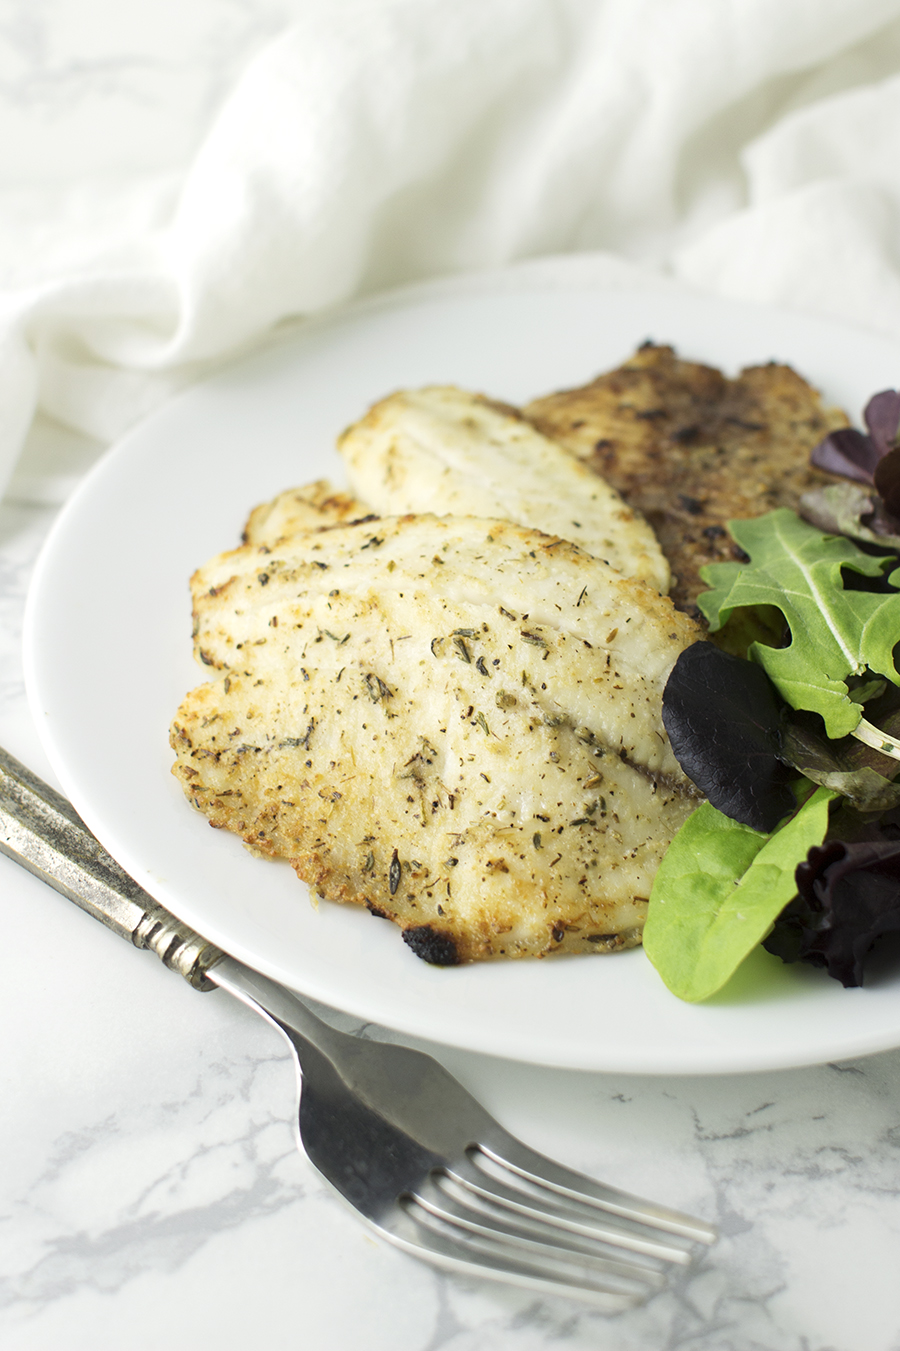 Spicy Coconut Whitefish recipe from acleanplate.com #paleo #aip #glutenfree